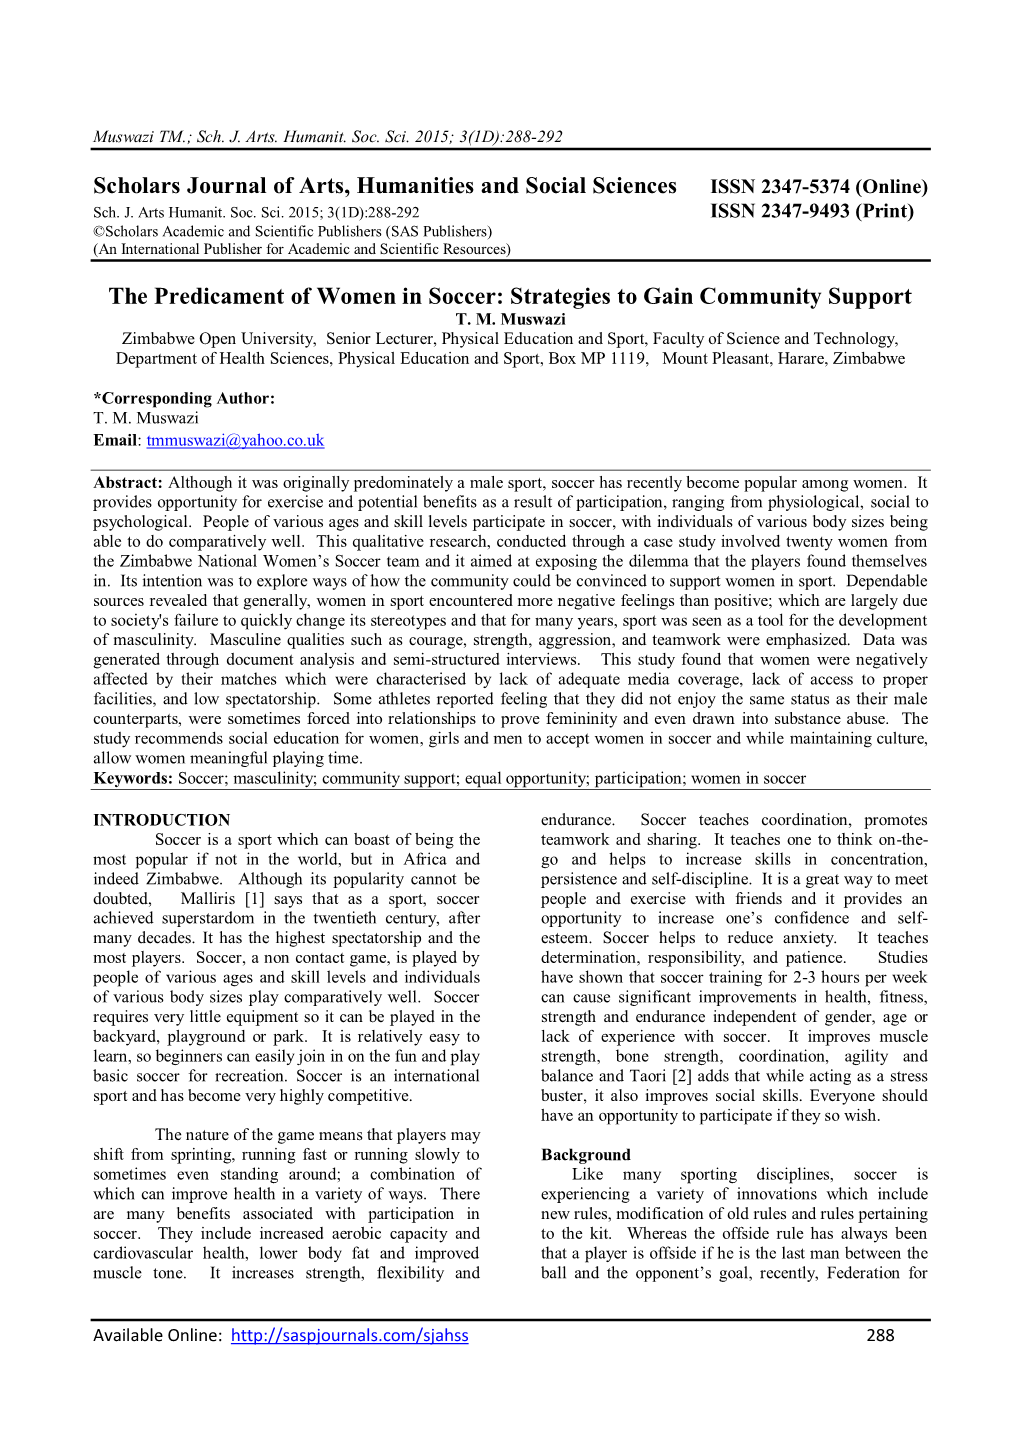 The Predicament of Women in Soccer: Strategies to Gain Community Support T